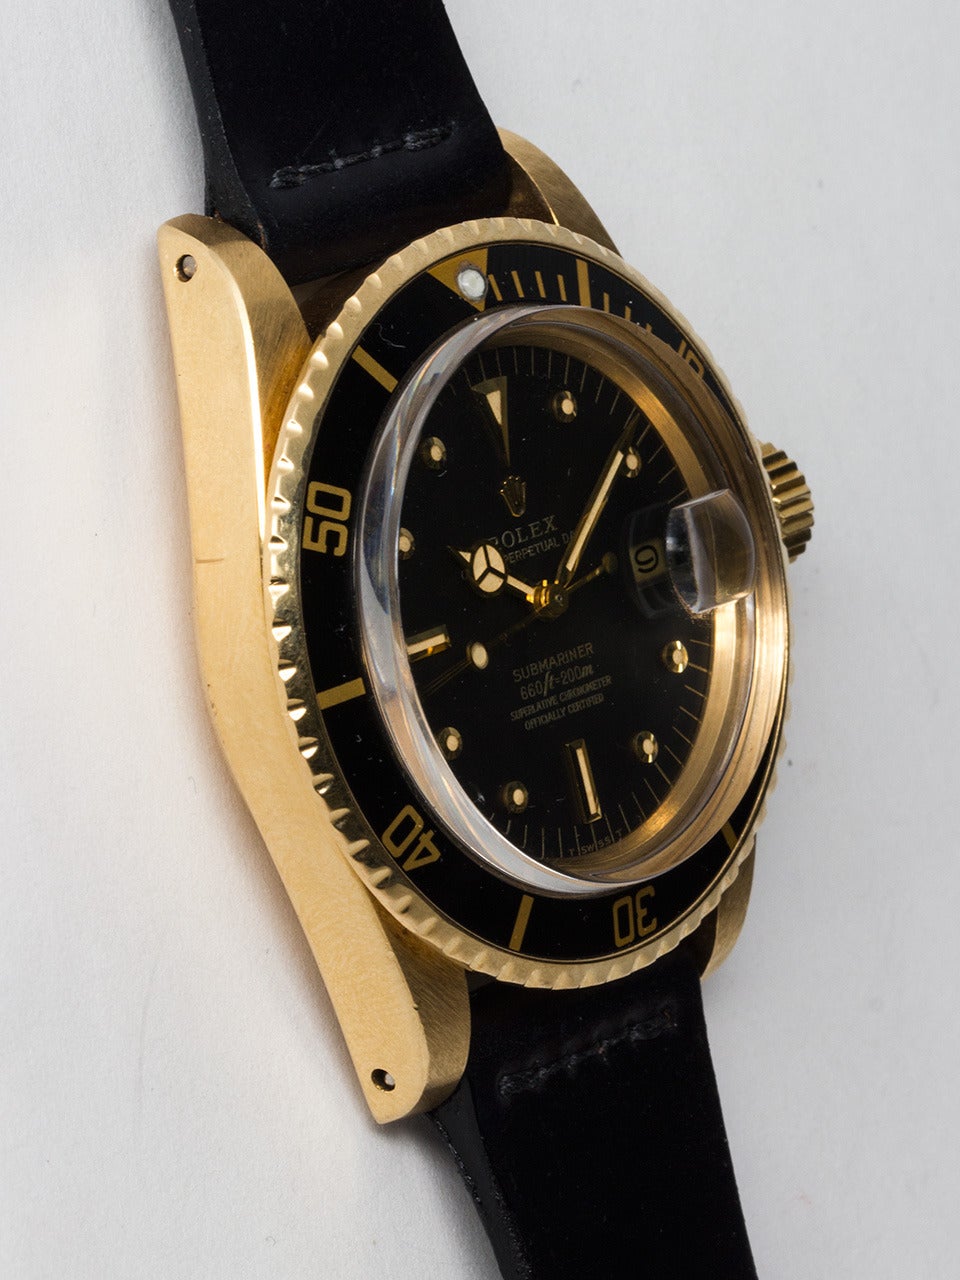 Rolex 18K Yellow Gold Submariner Wristwatch ref 1680 serial number 5.8 million circa 1978. 39.5mm Oyster case with bi-directional elapsed time bezel and acrylic crystal. Beautiful condition original matte black applied rivet nipple dial with